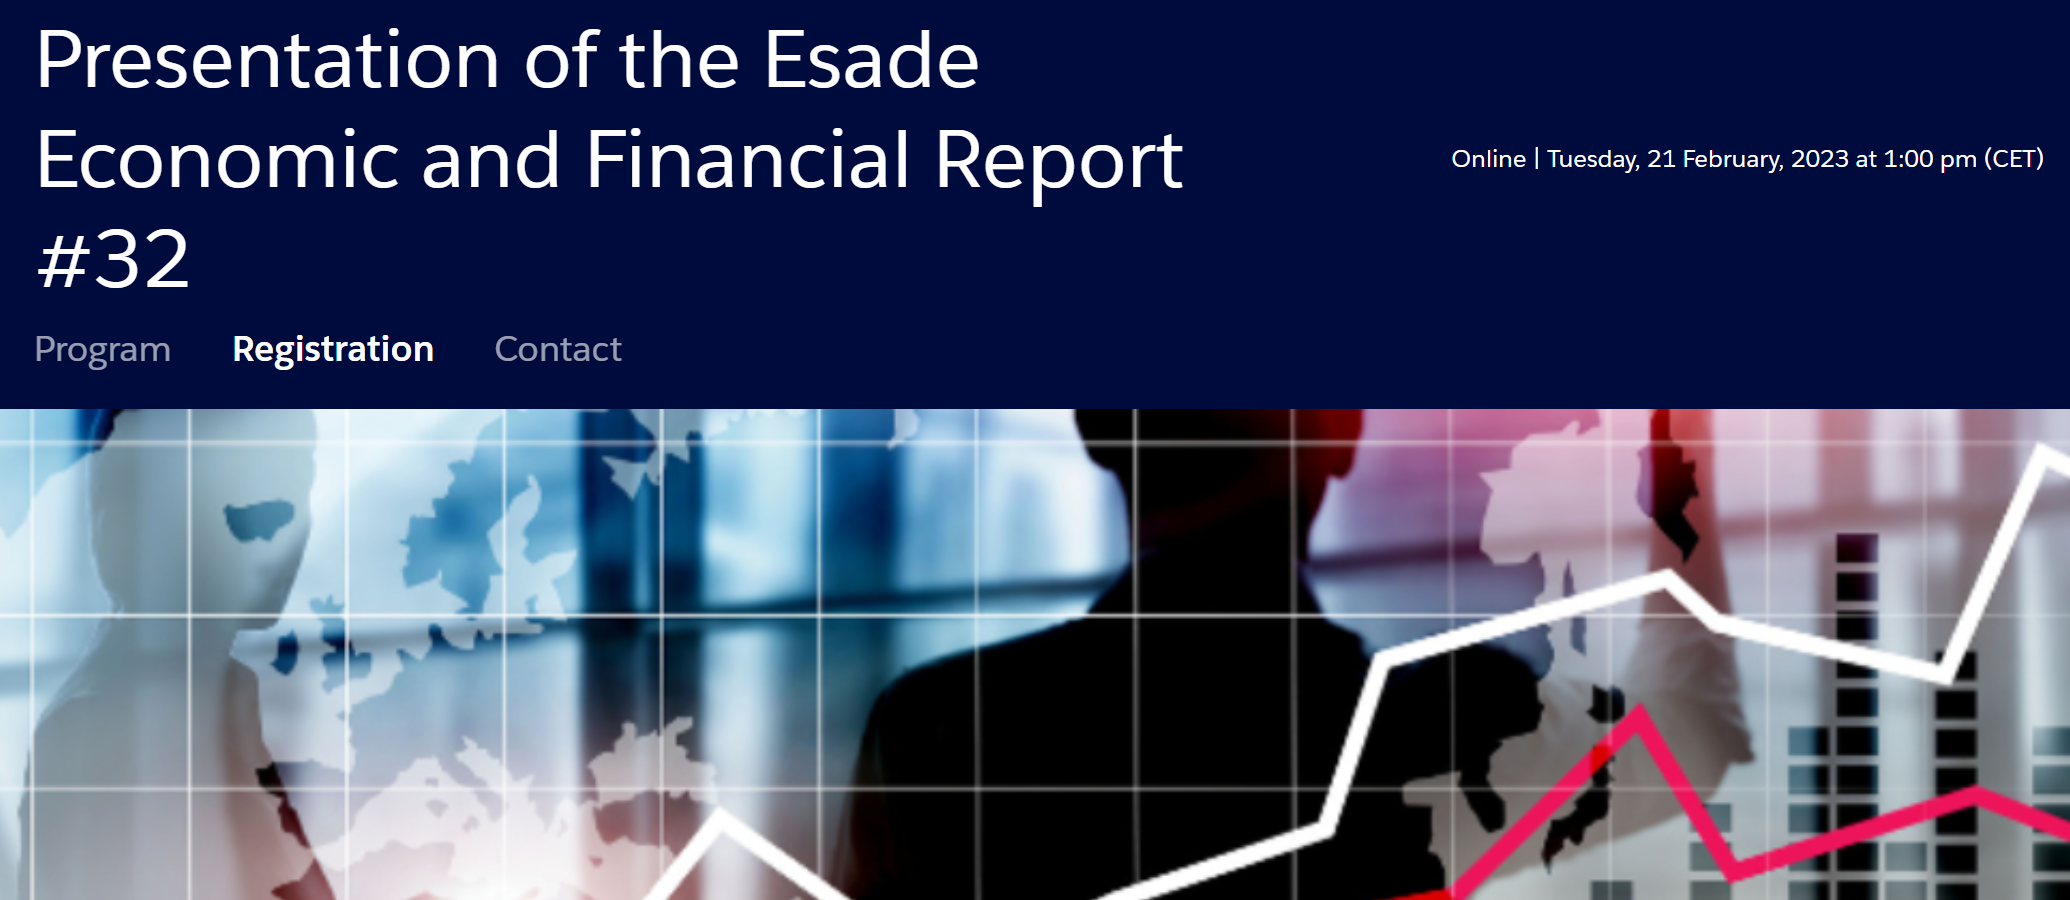 Presentation of the Esade Economic and Financial Report #32